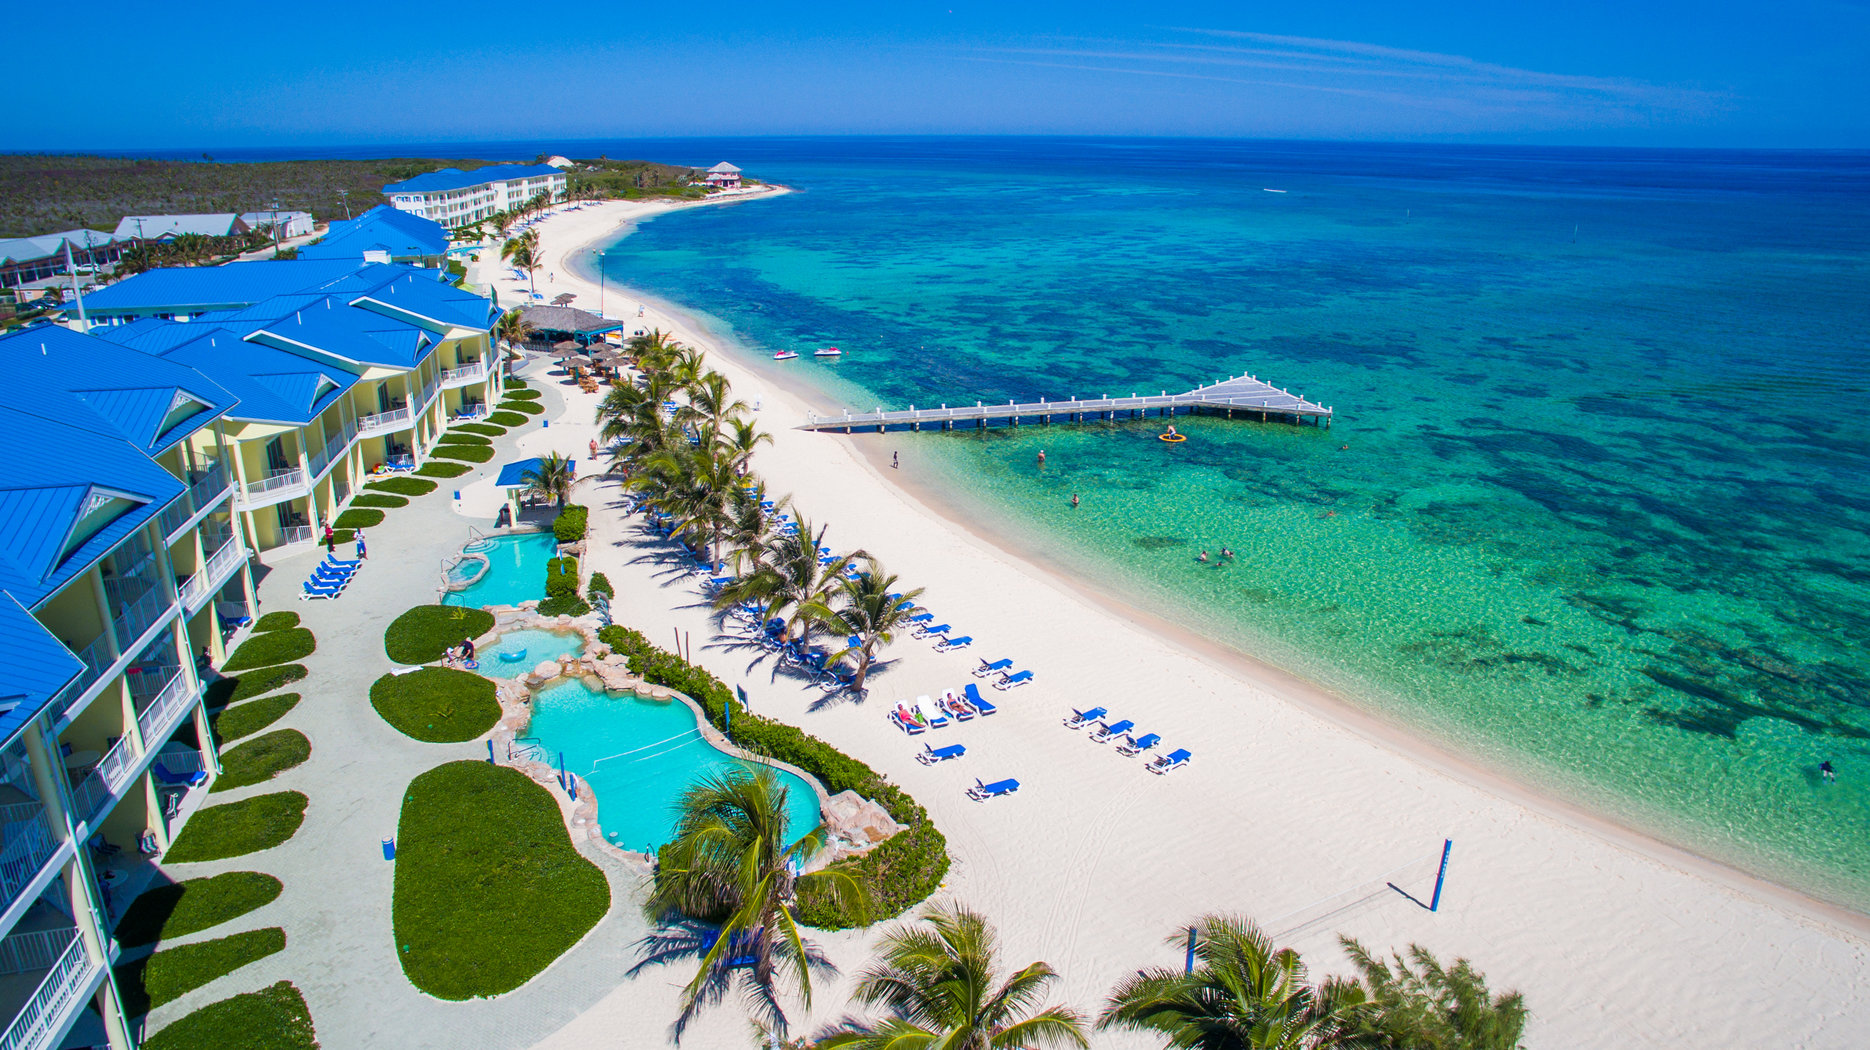 Wyndham Reef Resort This East End getaway, far from the crowds, provides a truly serene tropical escape.